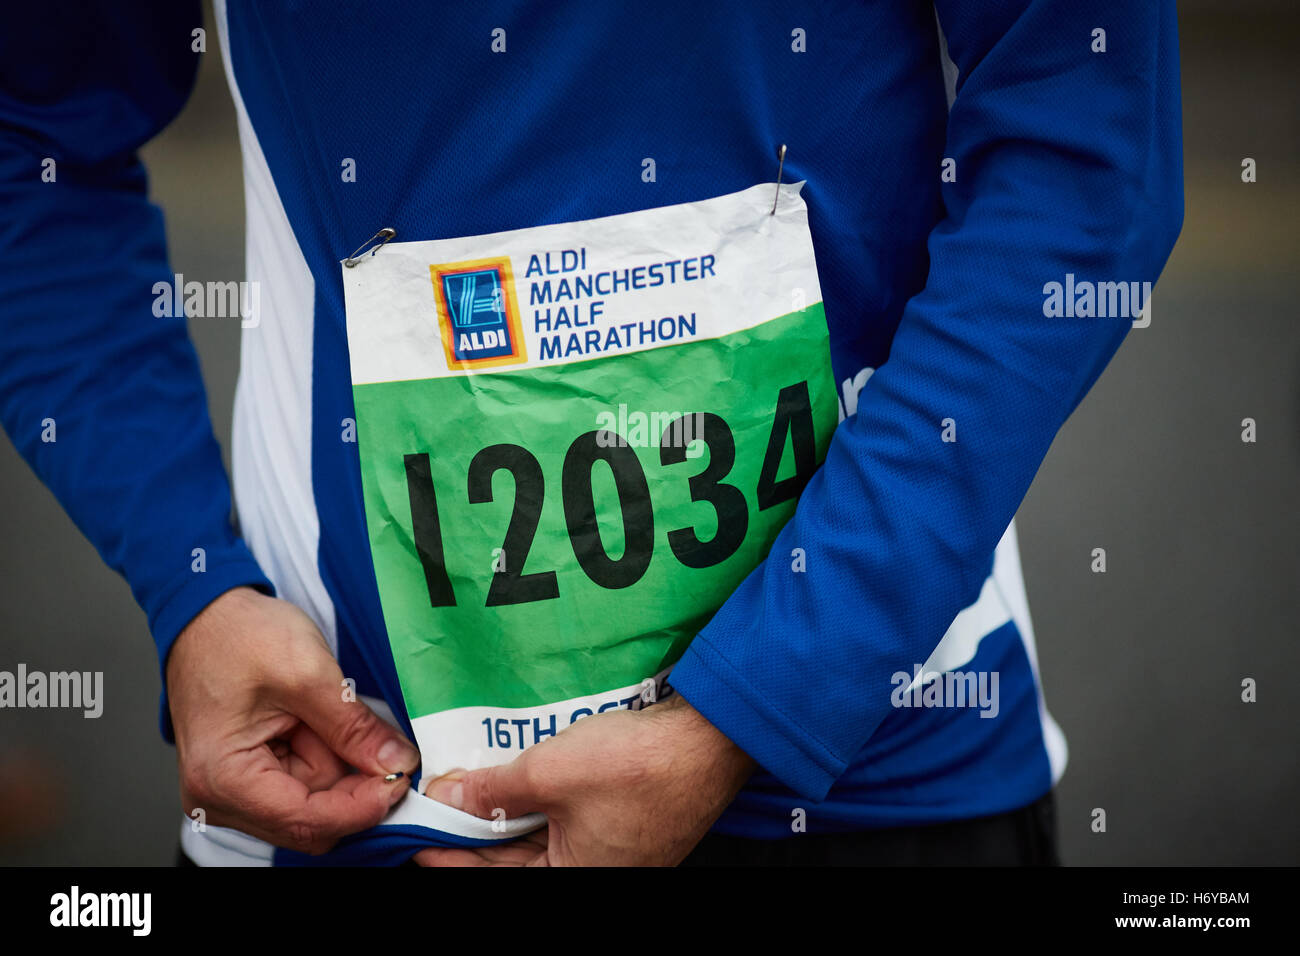 Marathon runner fixing number bib pins   Aldi sponsored event man male father daddy running competition crossing the finish line Stock Photo